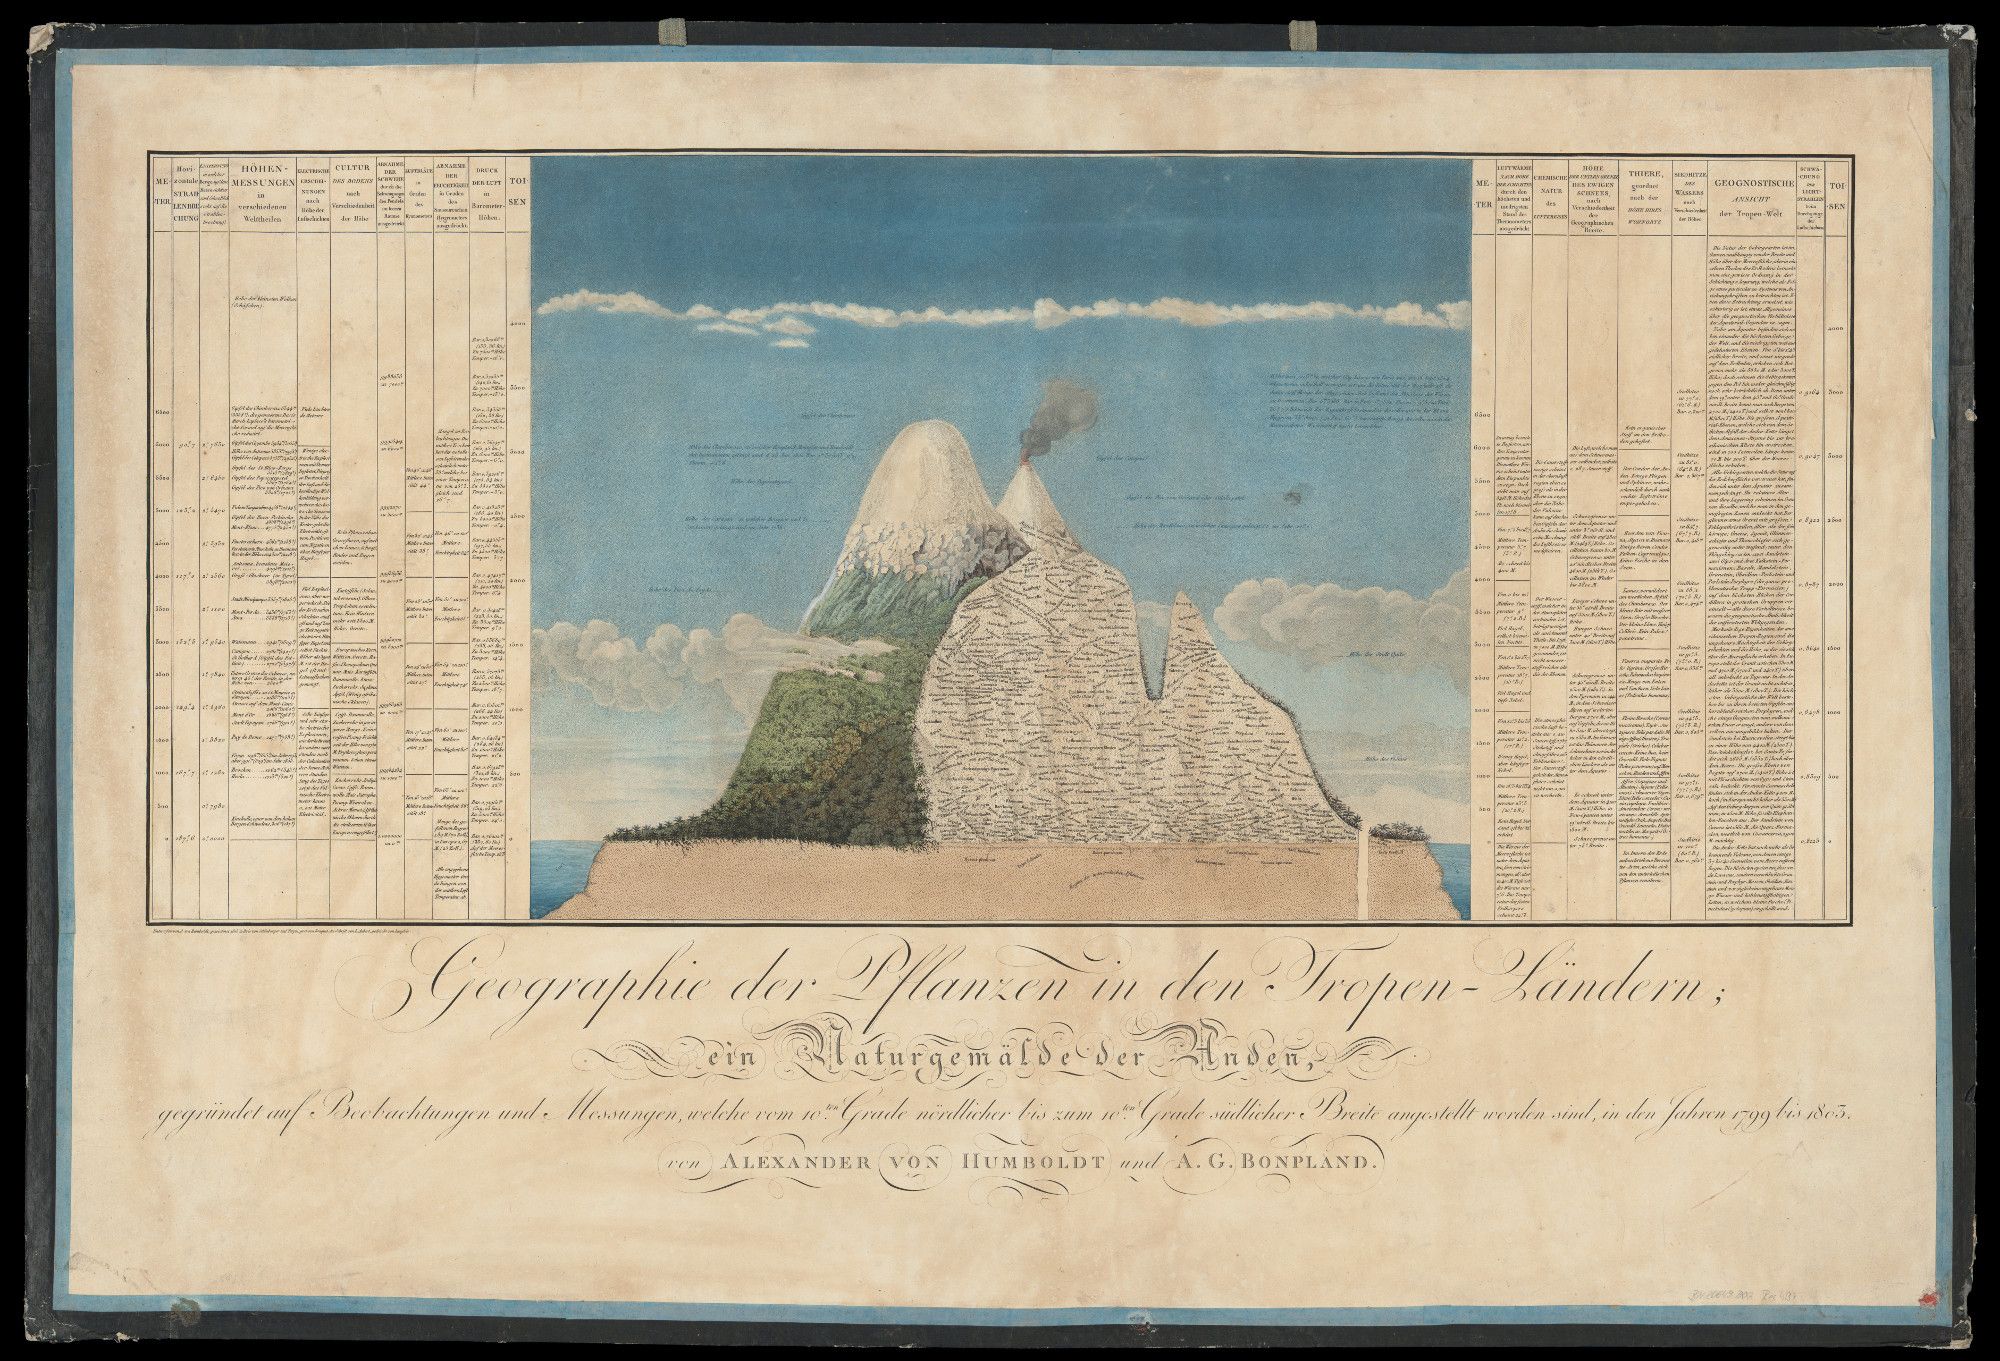 Chimborazo map by Alexander von Humboldt. Combining loads of data with a visual story. 